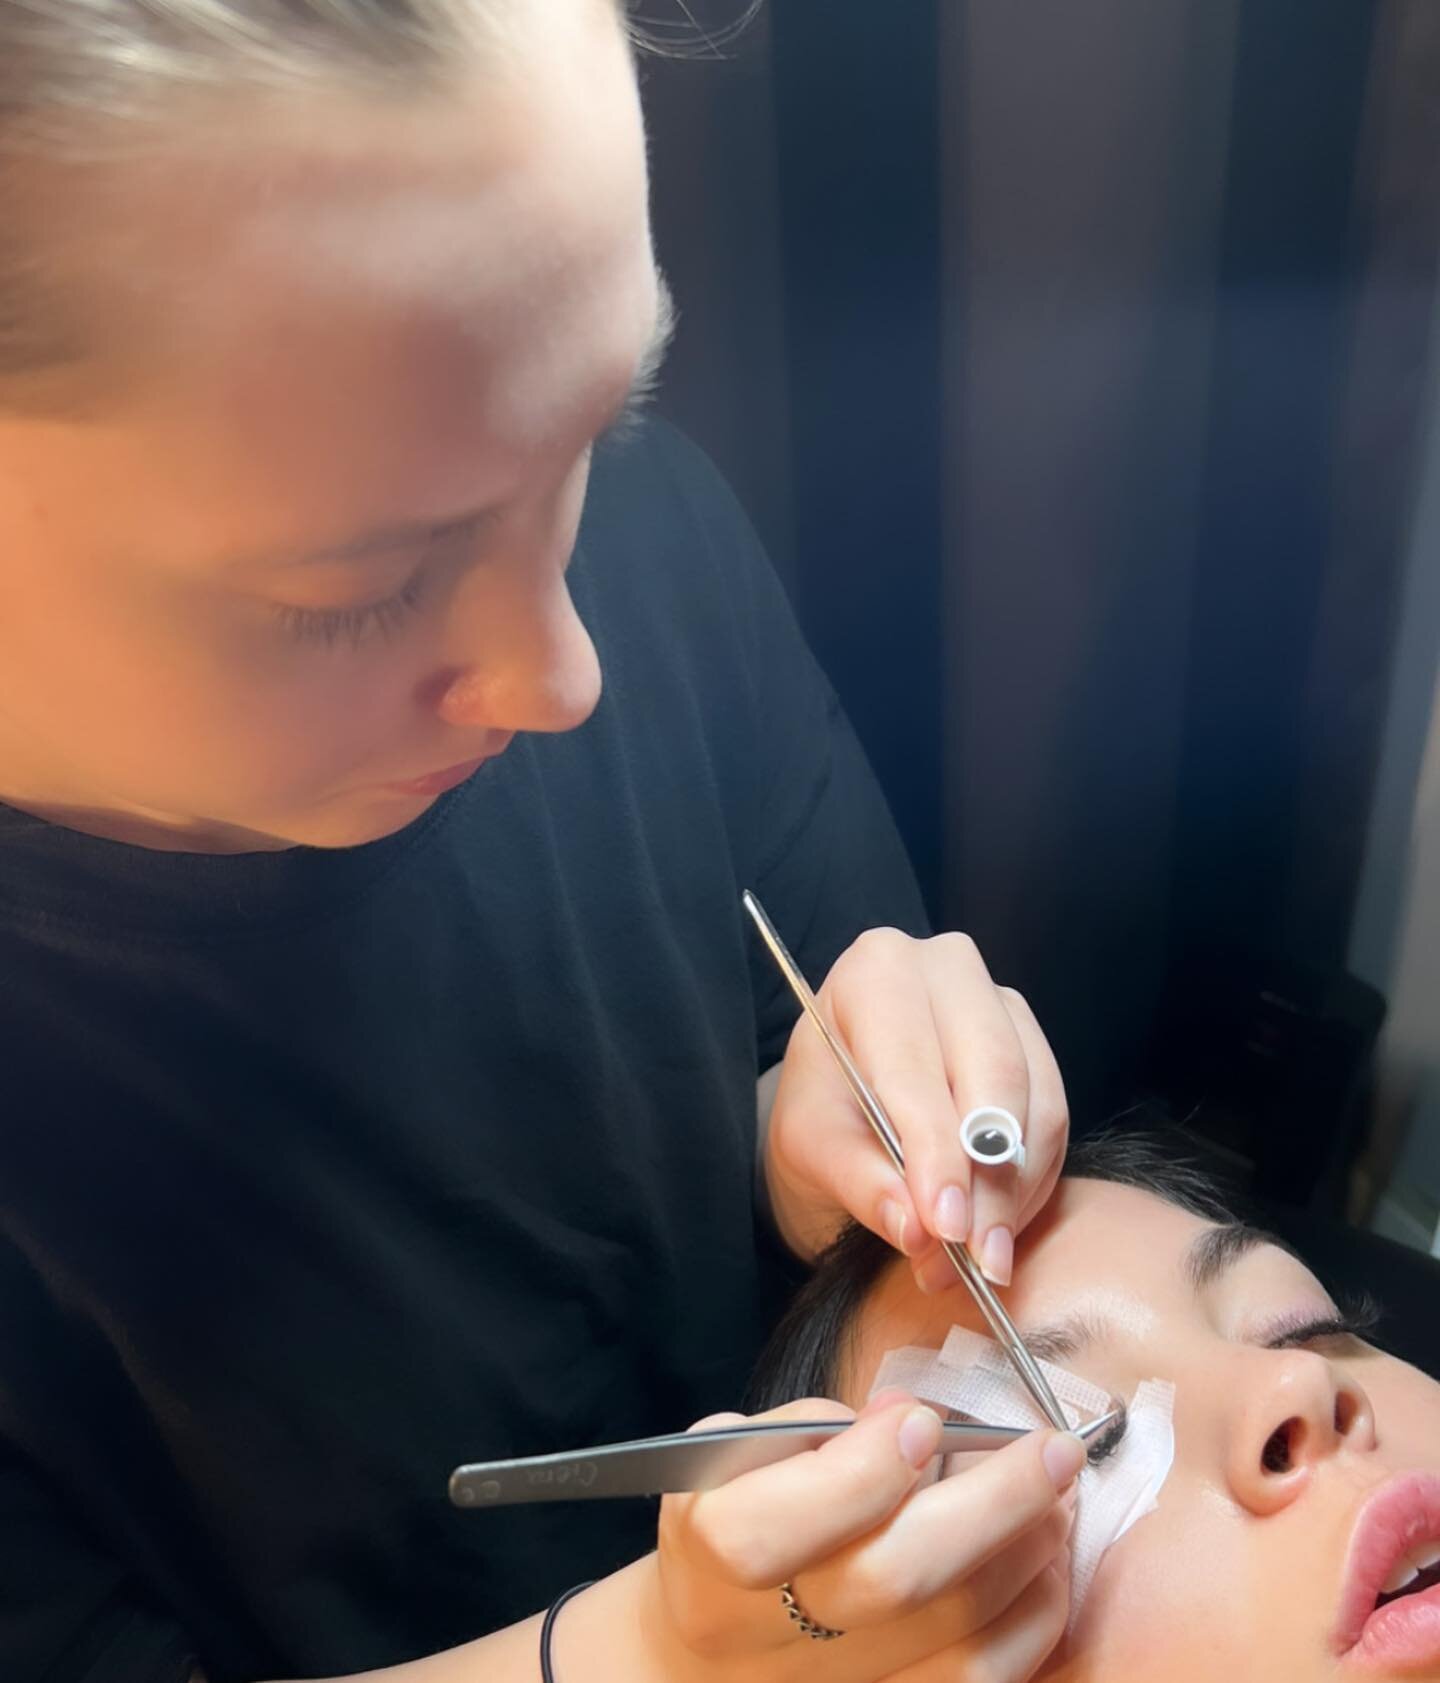 Welcome Ciera, our newest lash artist! Check out her work ➡️

✨Ciera moved to South Carolina from Florida, where she studied esthetics in 2020. She found her passion for lashes shortly after graduating and has been making clients happy ever since. 

